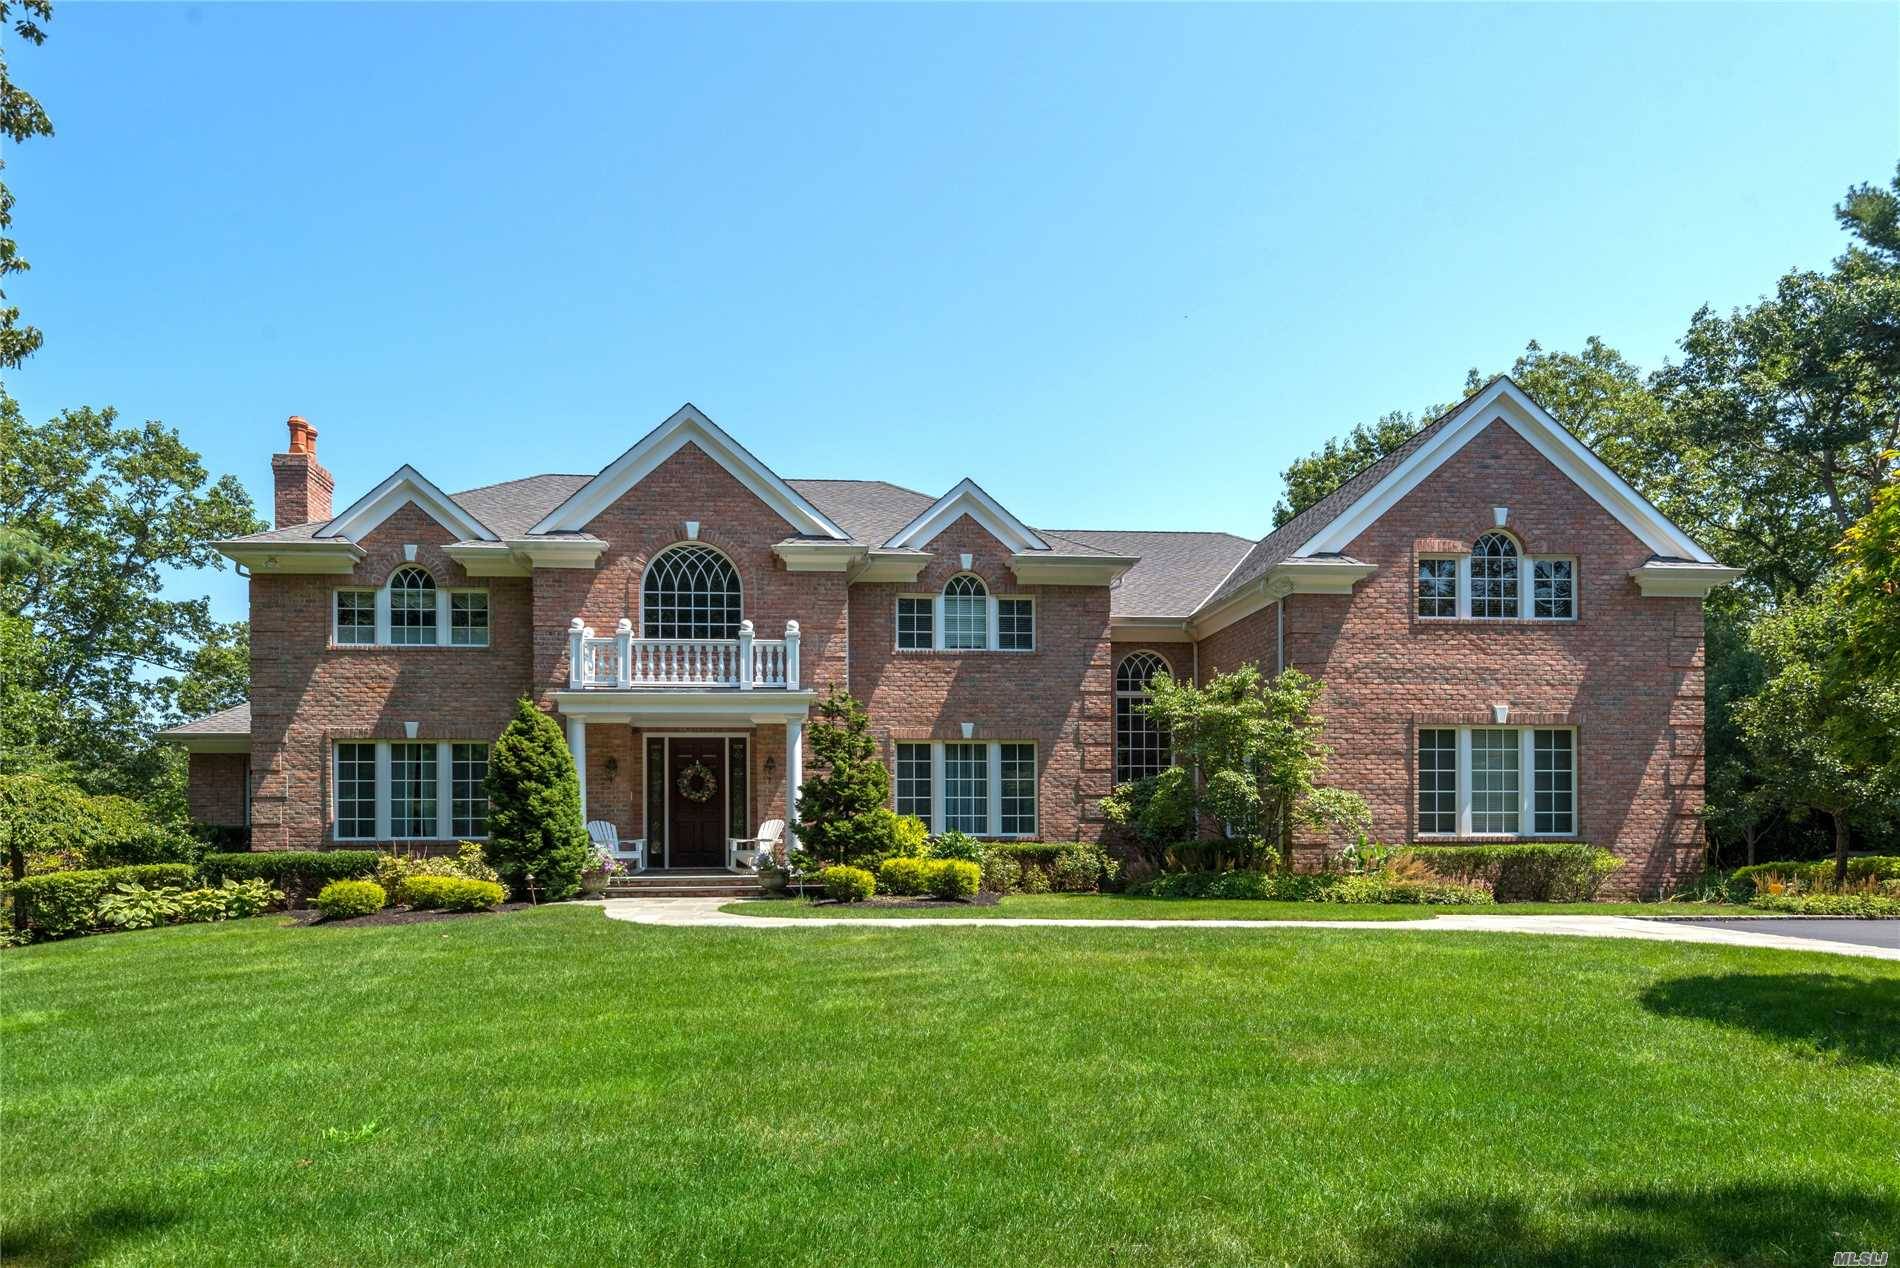 Impressive All-Brick Colonial Desirably Situated At The End Of A Cul-De-Sac On Shy 3 Acres Backing Stillwell Preserve.